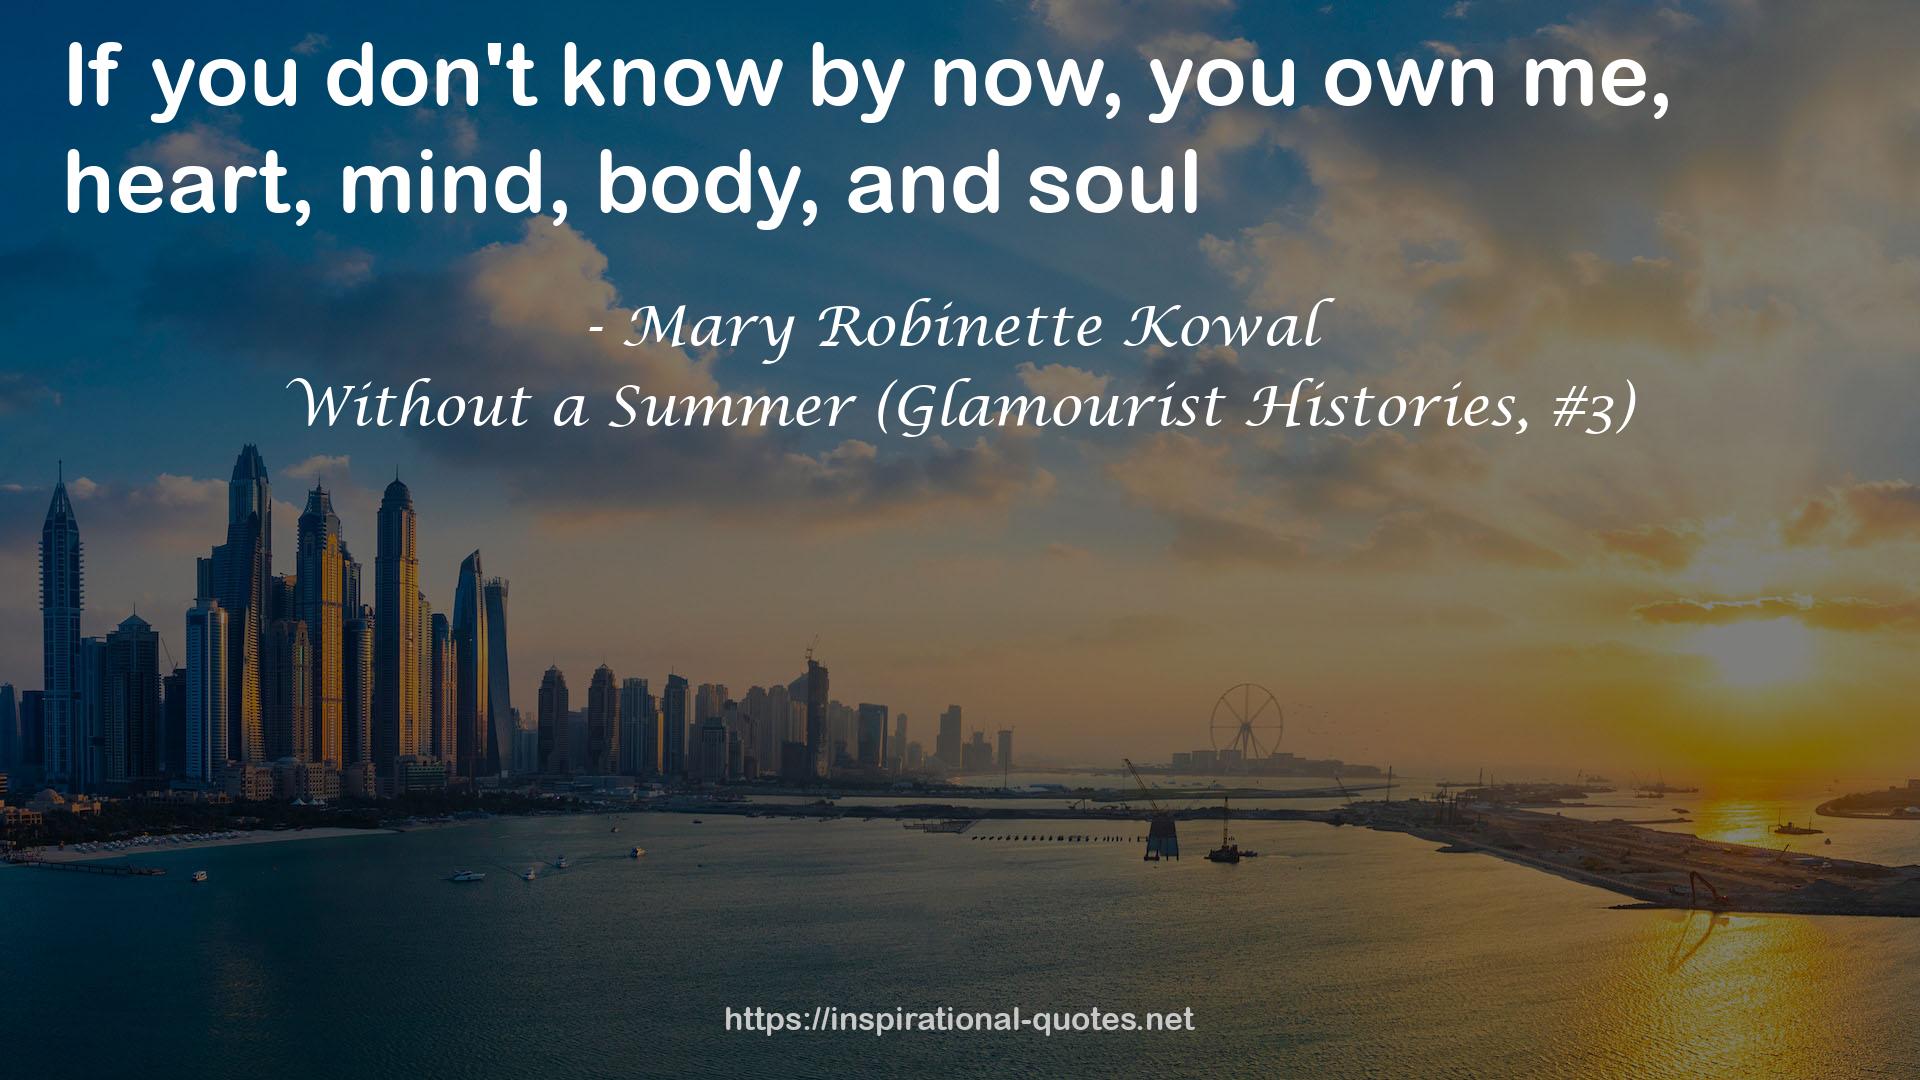 Without a Summer (Glamourist Histories, #3) QUOTES